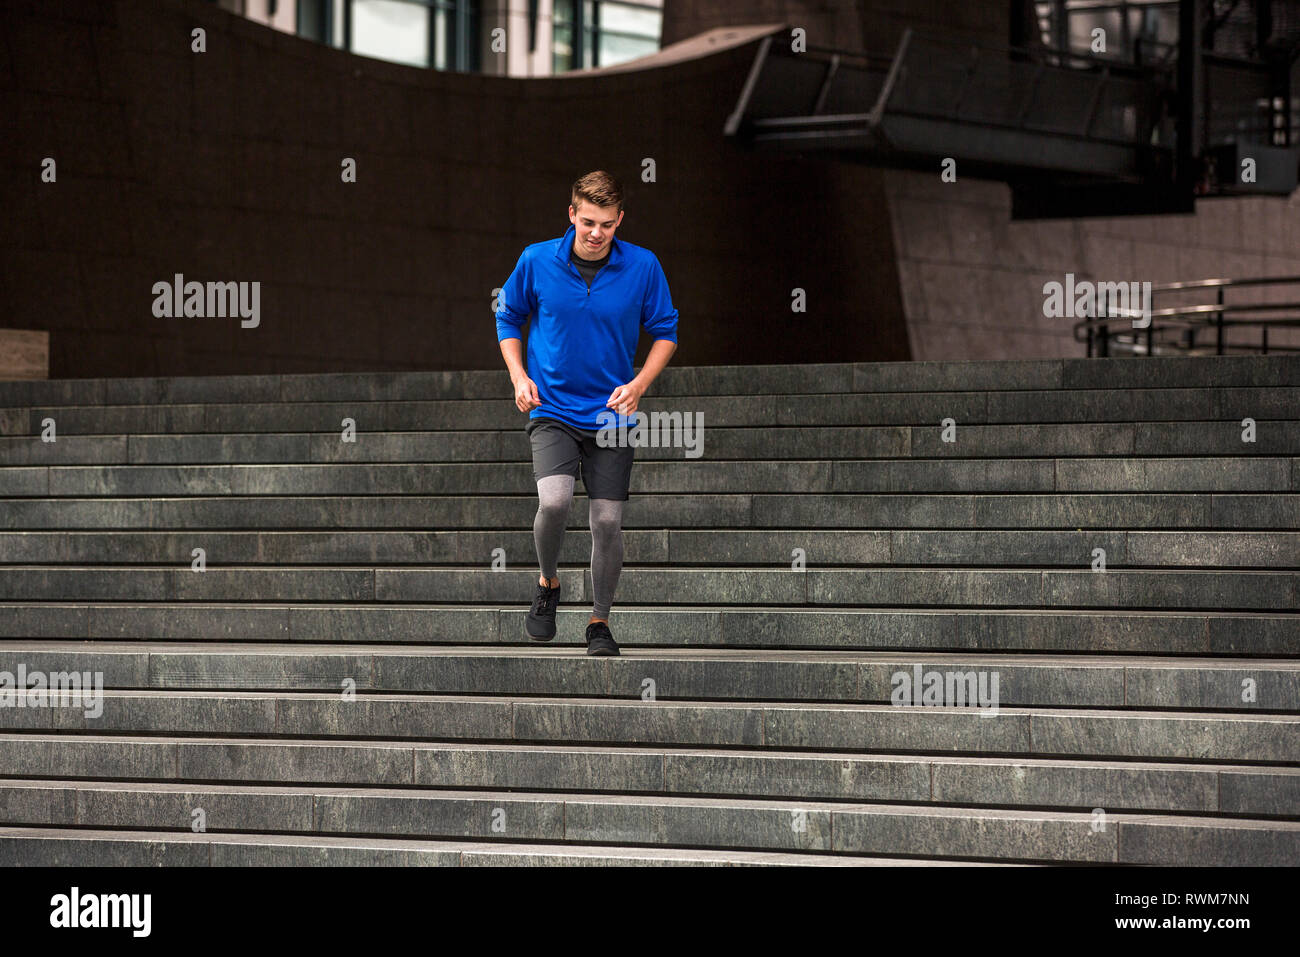 Young runner jogging down steps, London, UK Stock Photo